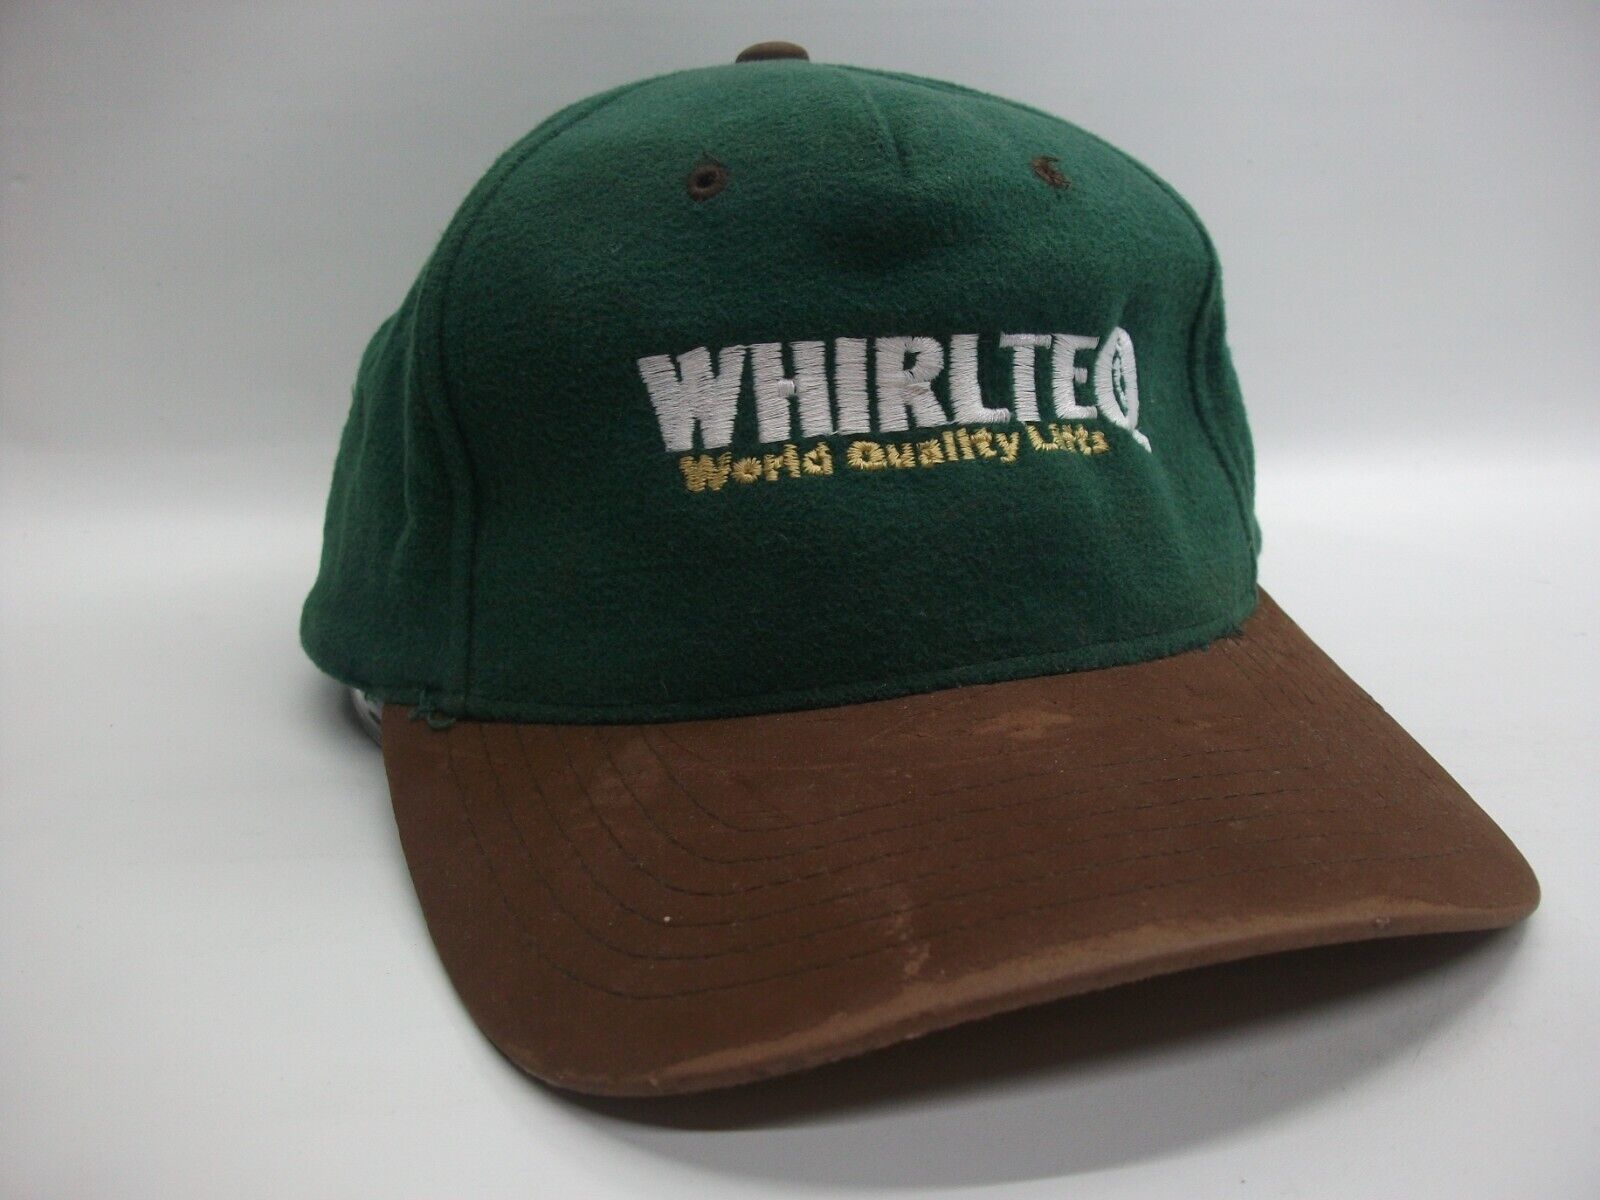 Primary image for Whirlteq World Quality Lifts Elevator Hat Green Beige Strapback Baseball Cap